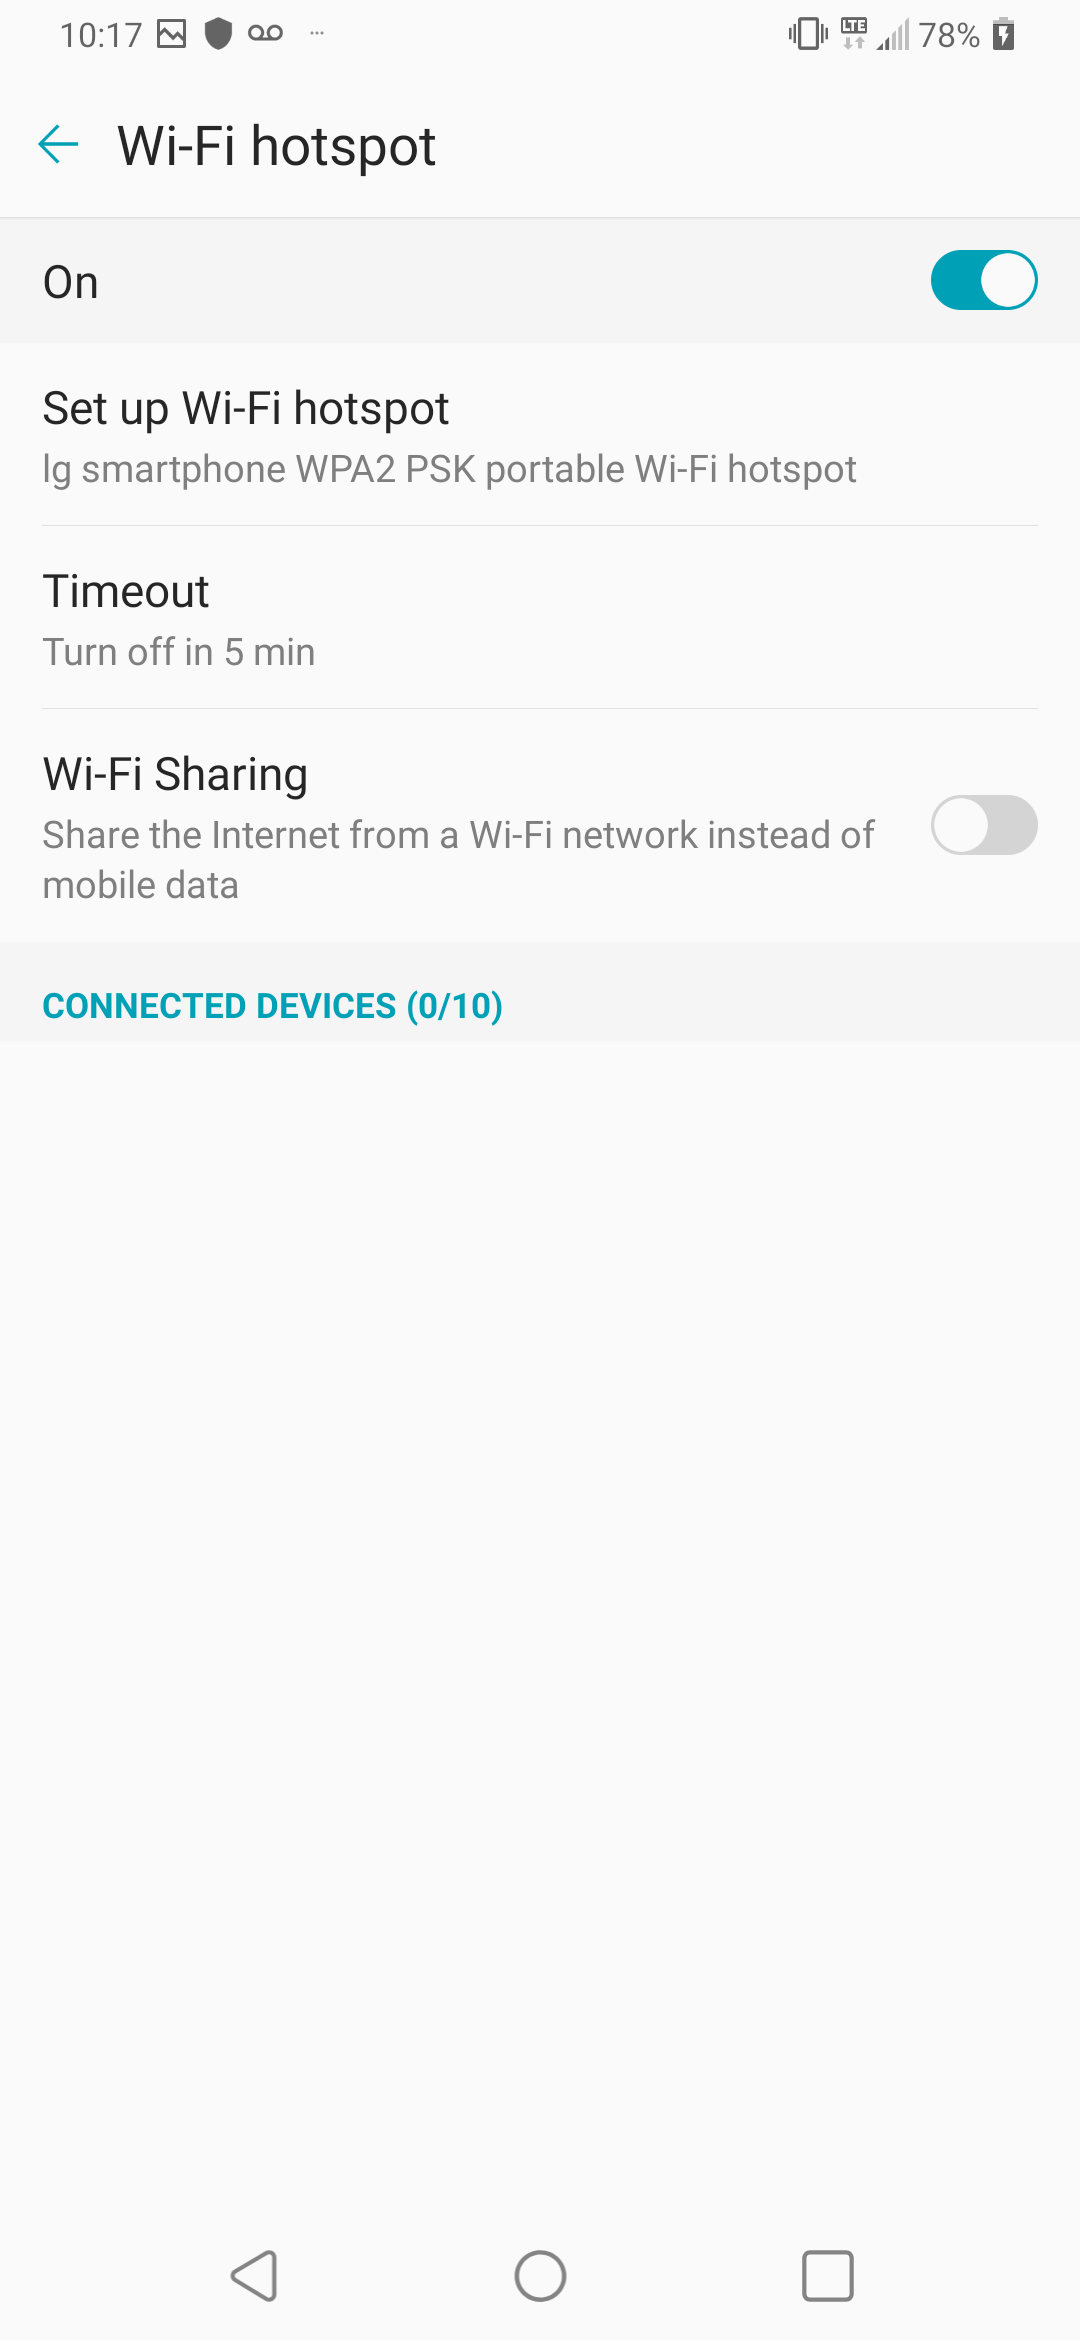 The hotspot is now active. Other devices can connect to it using your network name (step 5) and password (step 7).